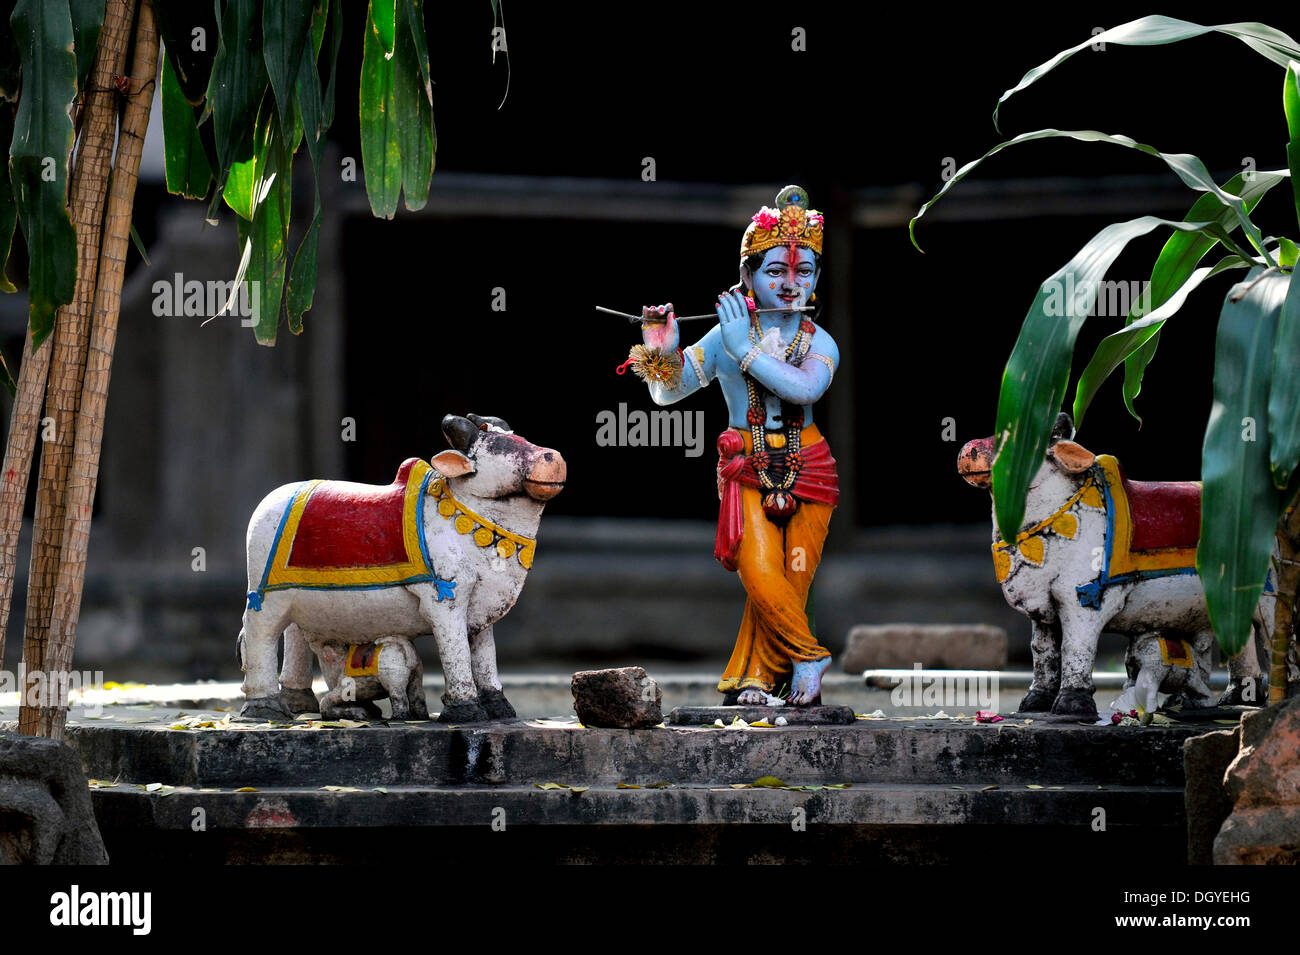 Sculptures, Krishna, the god of shepherds with a flute and sacred cows, Ahilya Fort, Maheshwar, Madhya Pradesh, India, Asia Stock Photo